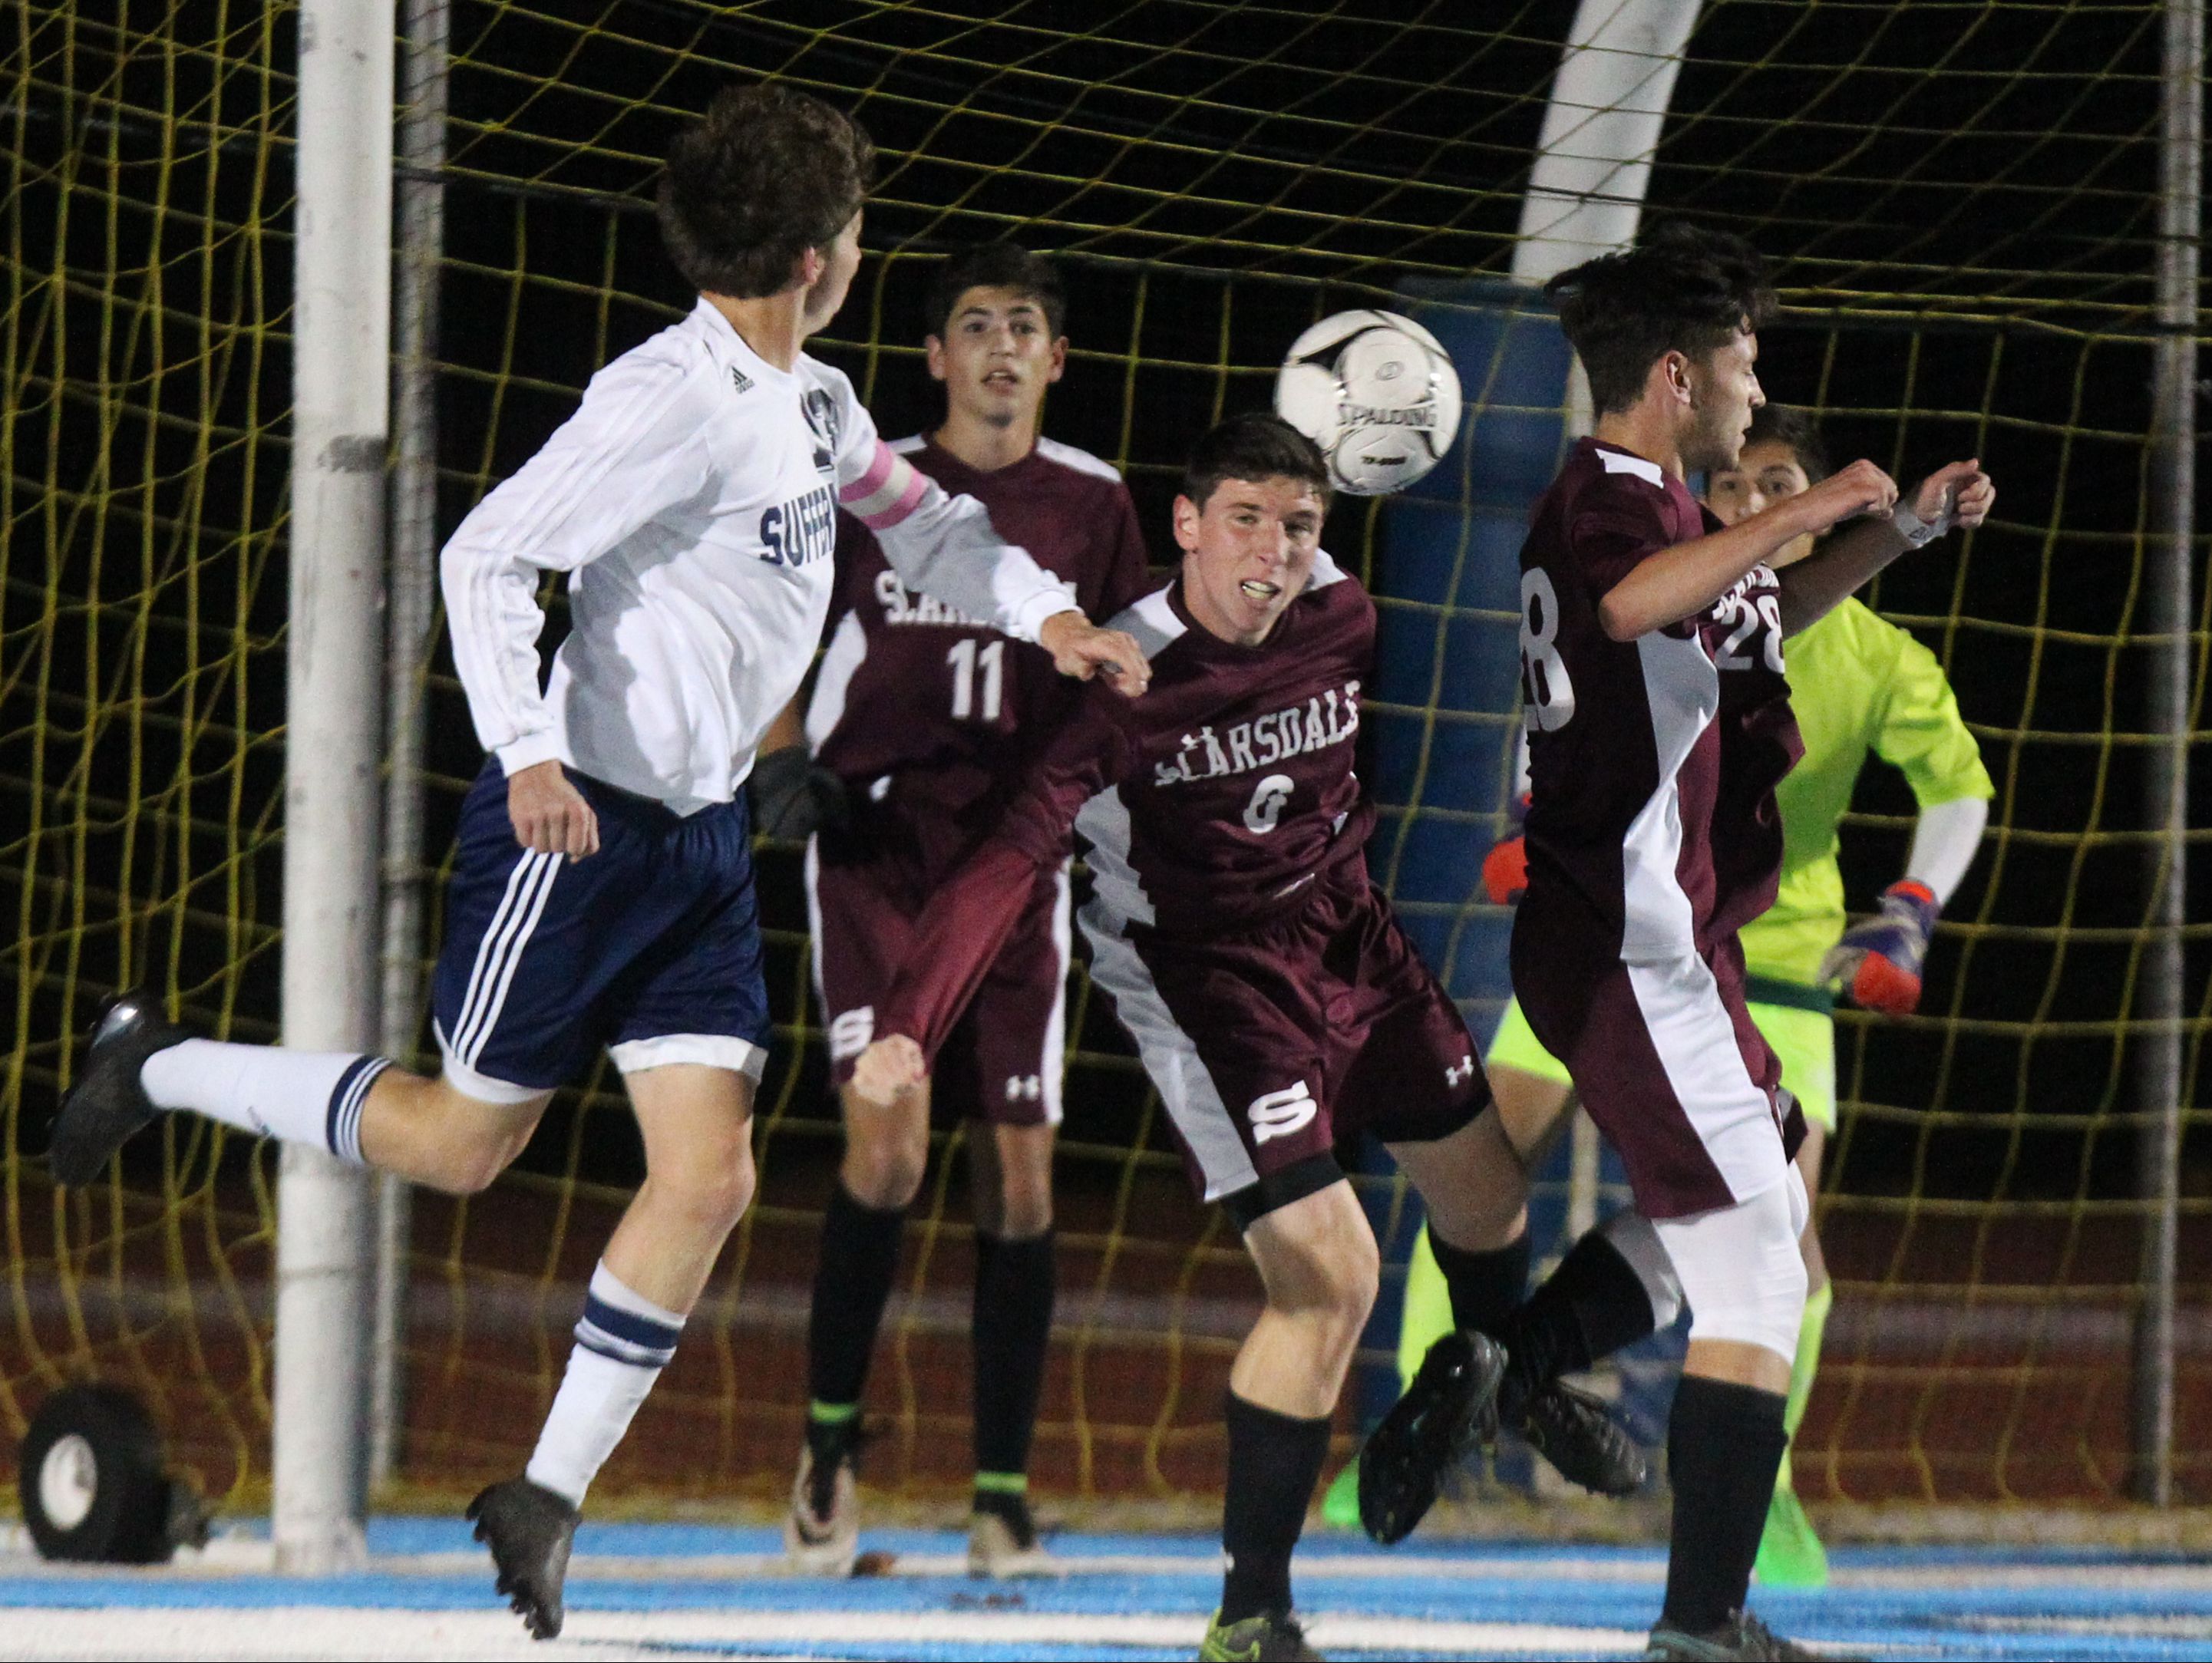 Scarsdale won 2-1 in a Class AA boys soccer quarterfinal at Suffern Oct. 24, 2016.